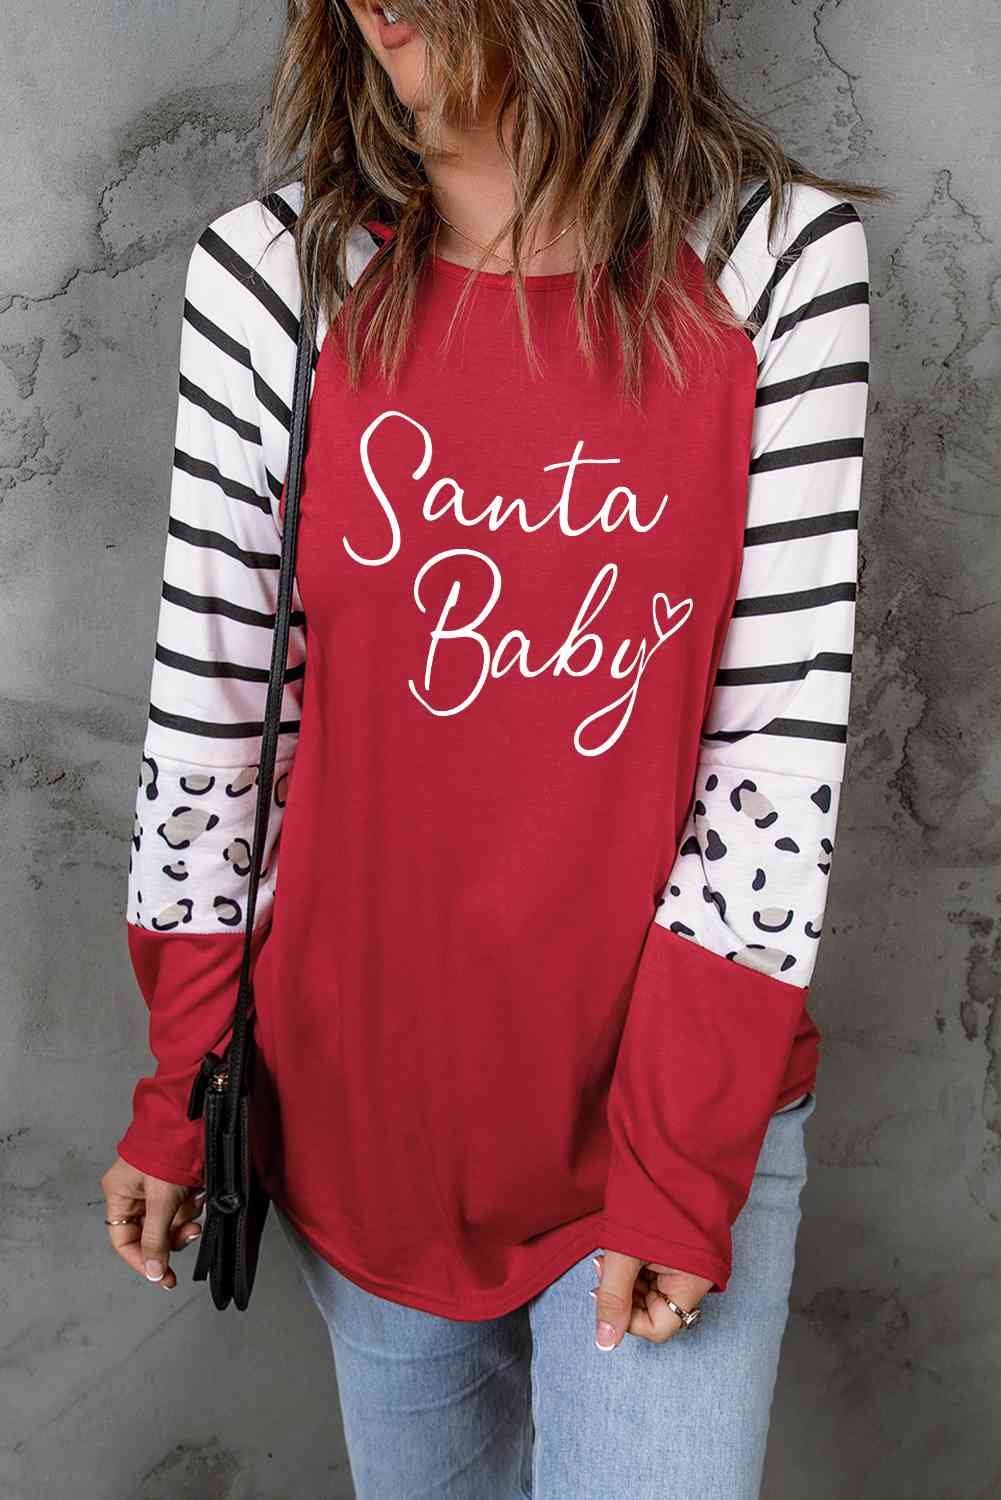 SANTA BABY Graphic Long Sleeve T-Shirt  Krazy Heart Designs Boutique   